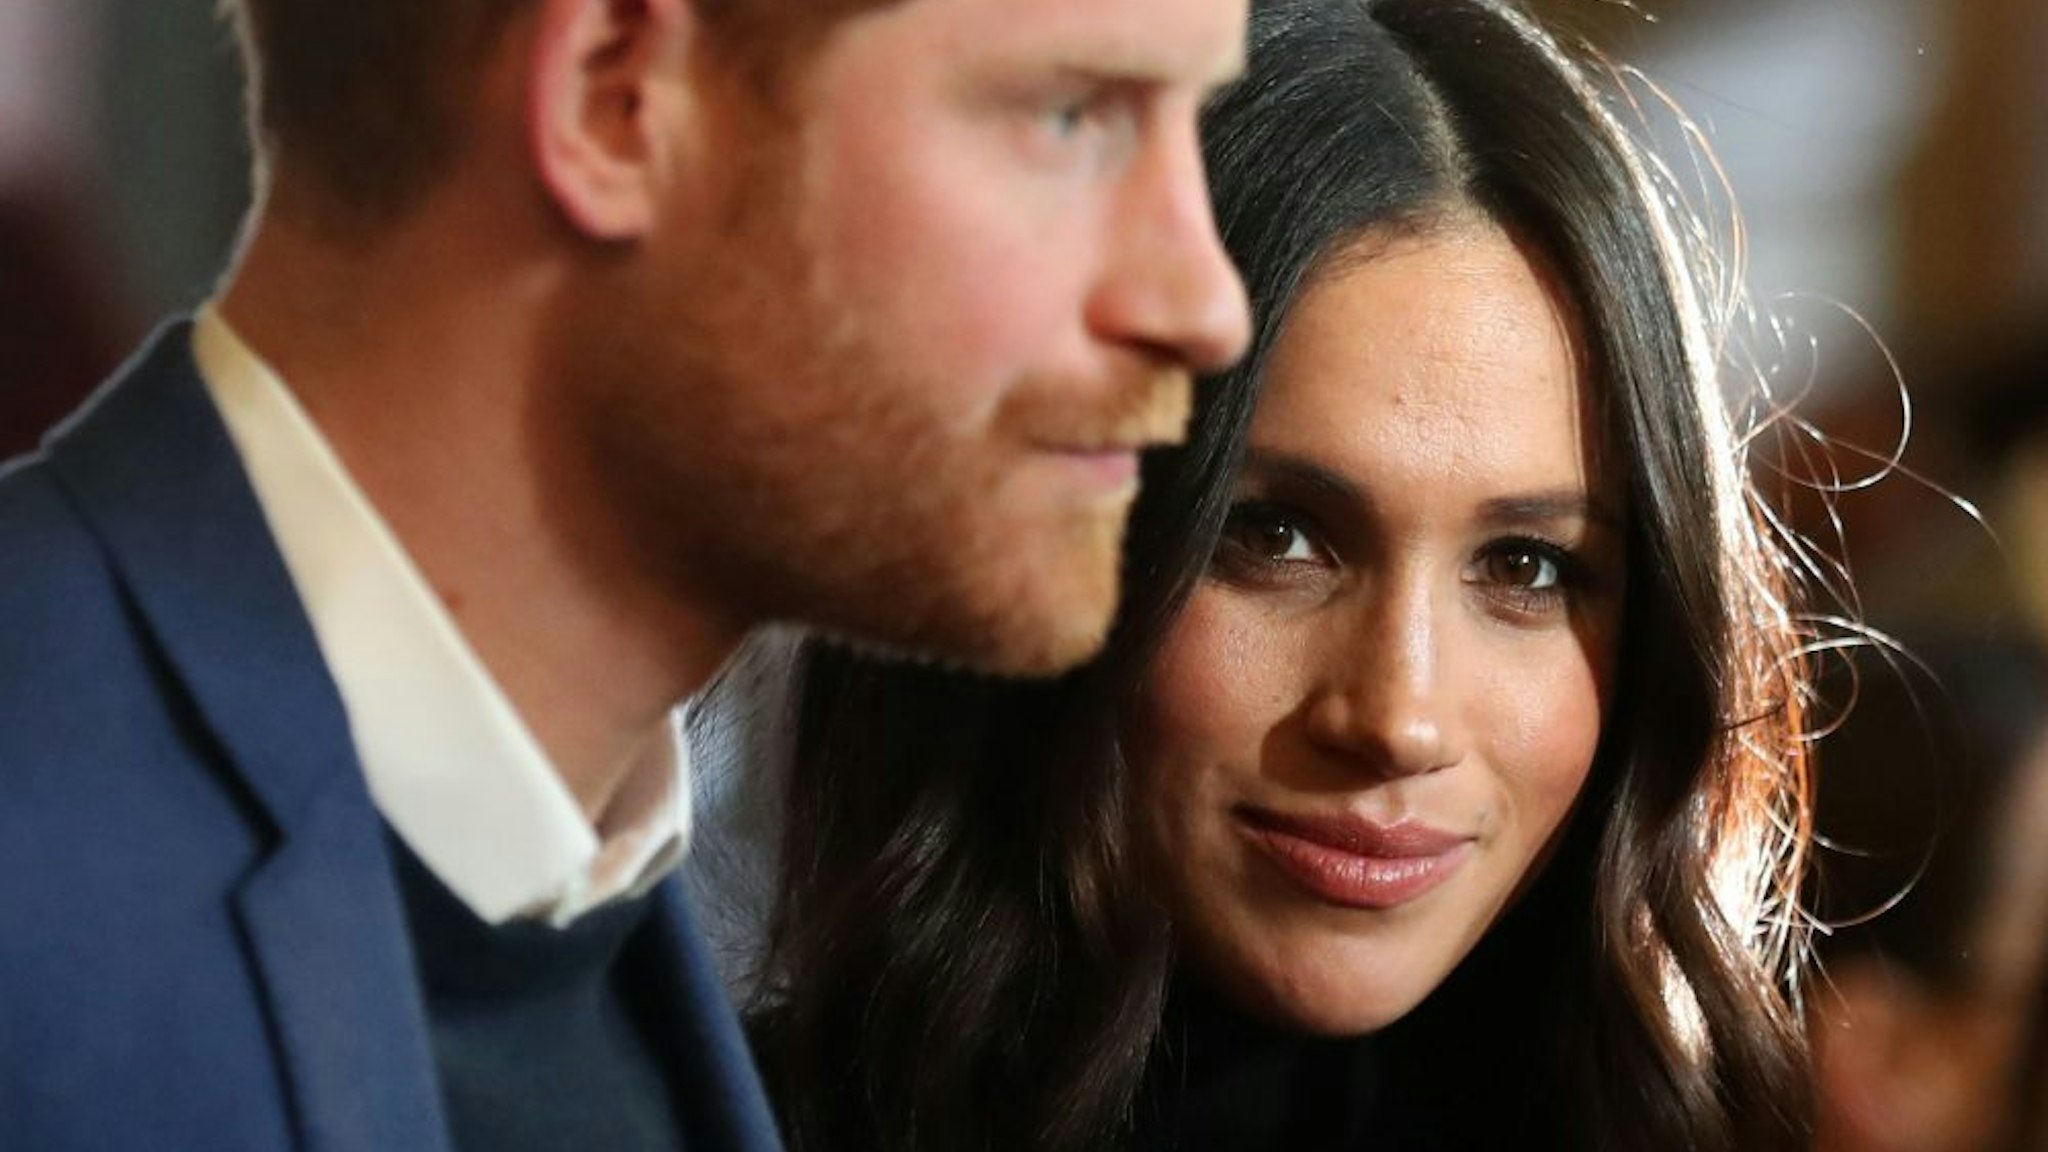 EDINBURGH, SCOTLAND - FEBRUARY 13: Prince Harry and Meghan Markle attend a reception for young people at the Palace of Holyroodhouse on February 13, 2018 in Edinburgh, Scotland.